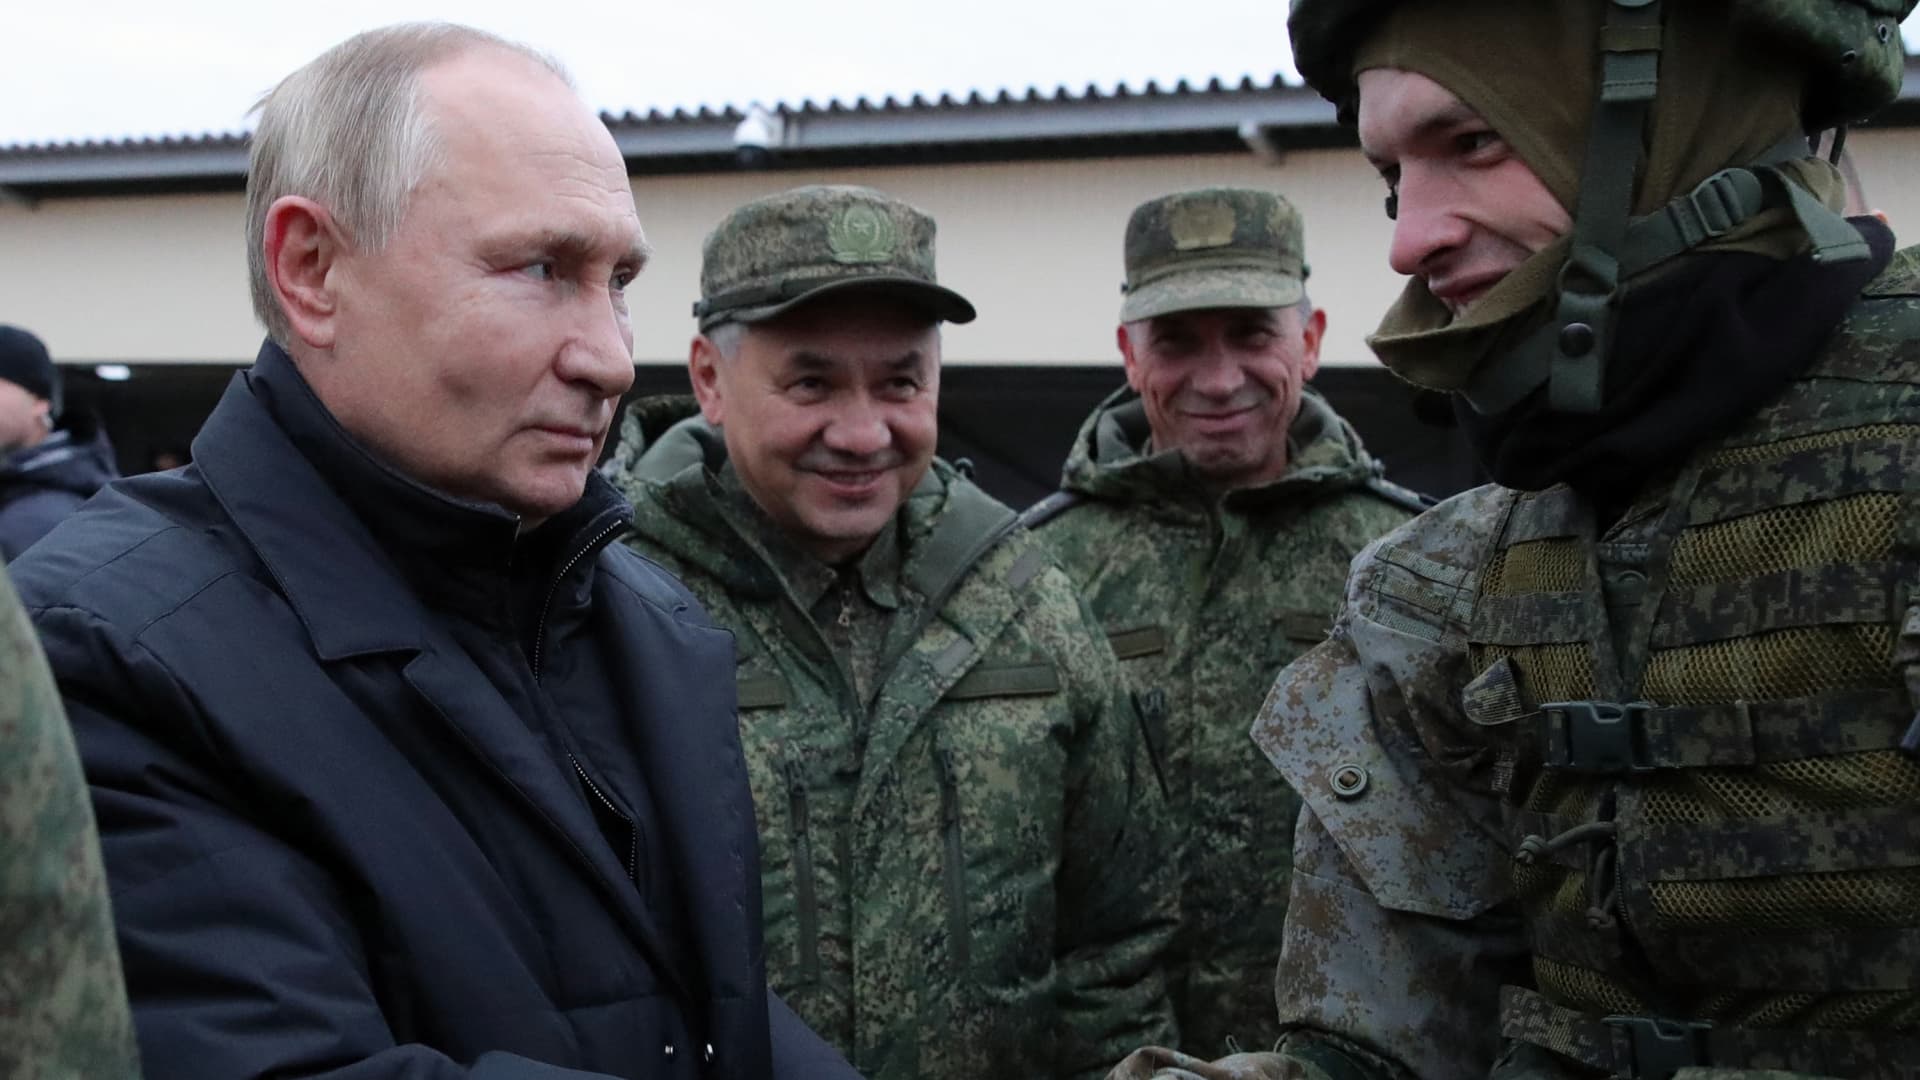 Russian President Vladimir Putin (L) and Defence Minister Sergei Shoigu (C) meet soldiers during a visit at a military training centre of the Western Military District for mobilized reservists, outside the town of Ryazan on October 20, 2022.